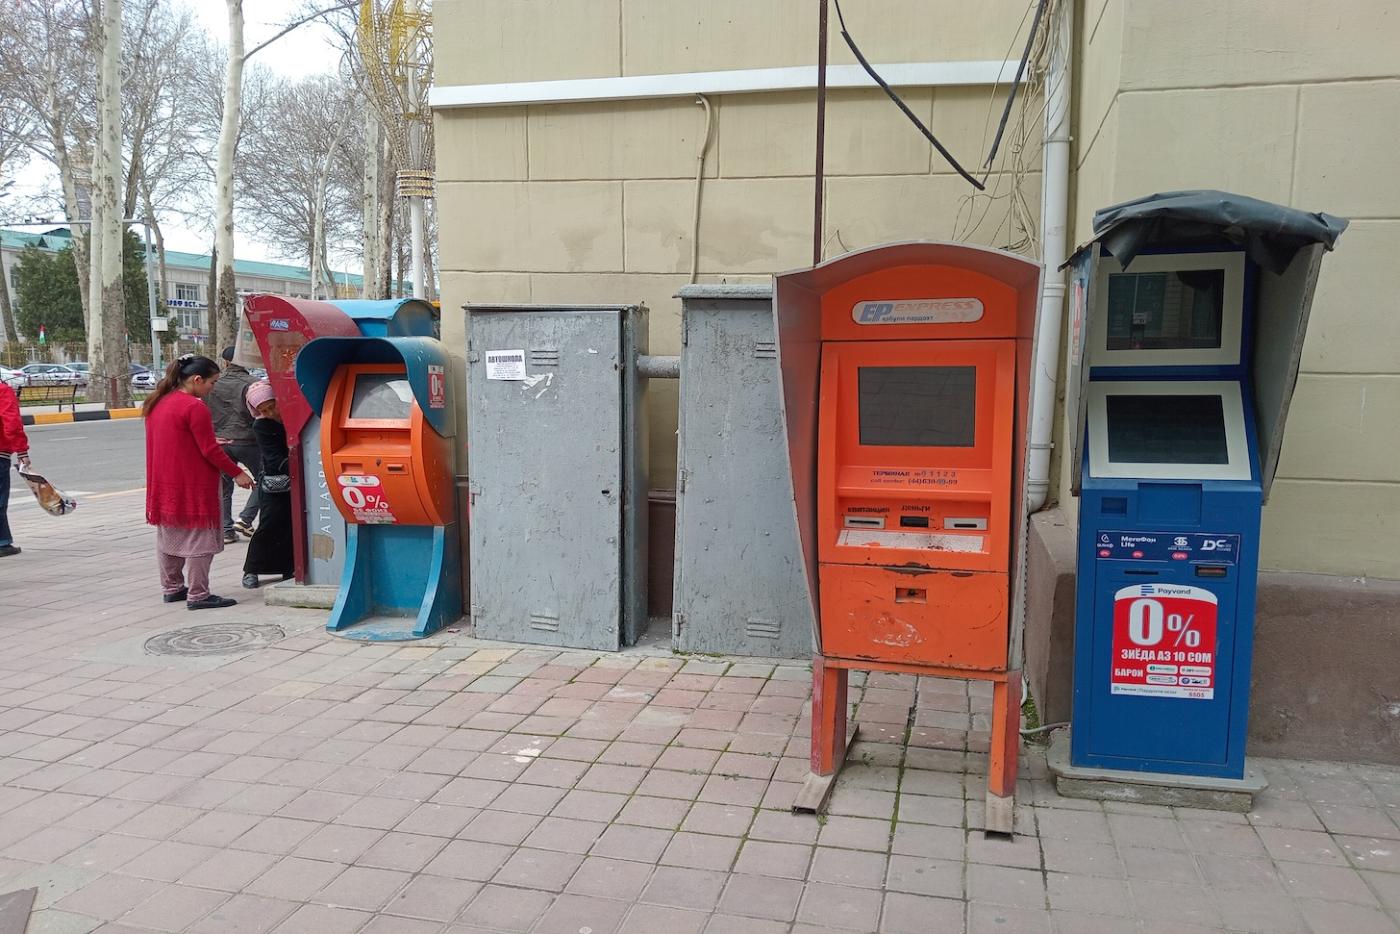 The Express Pay stations are found throughout the capital and are usually located near ATMs.